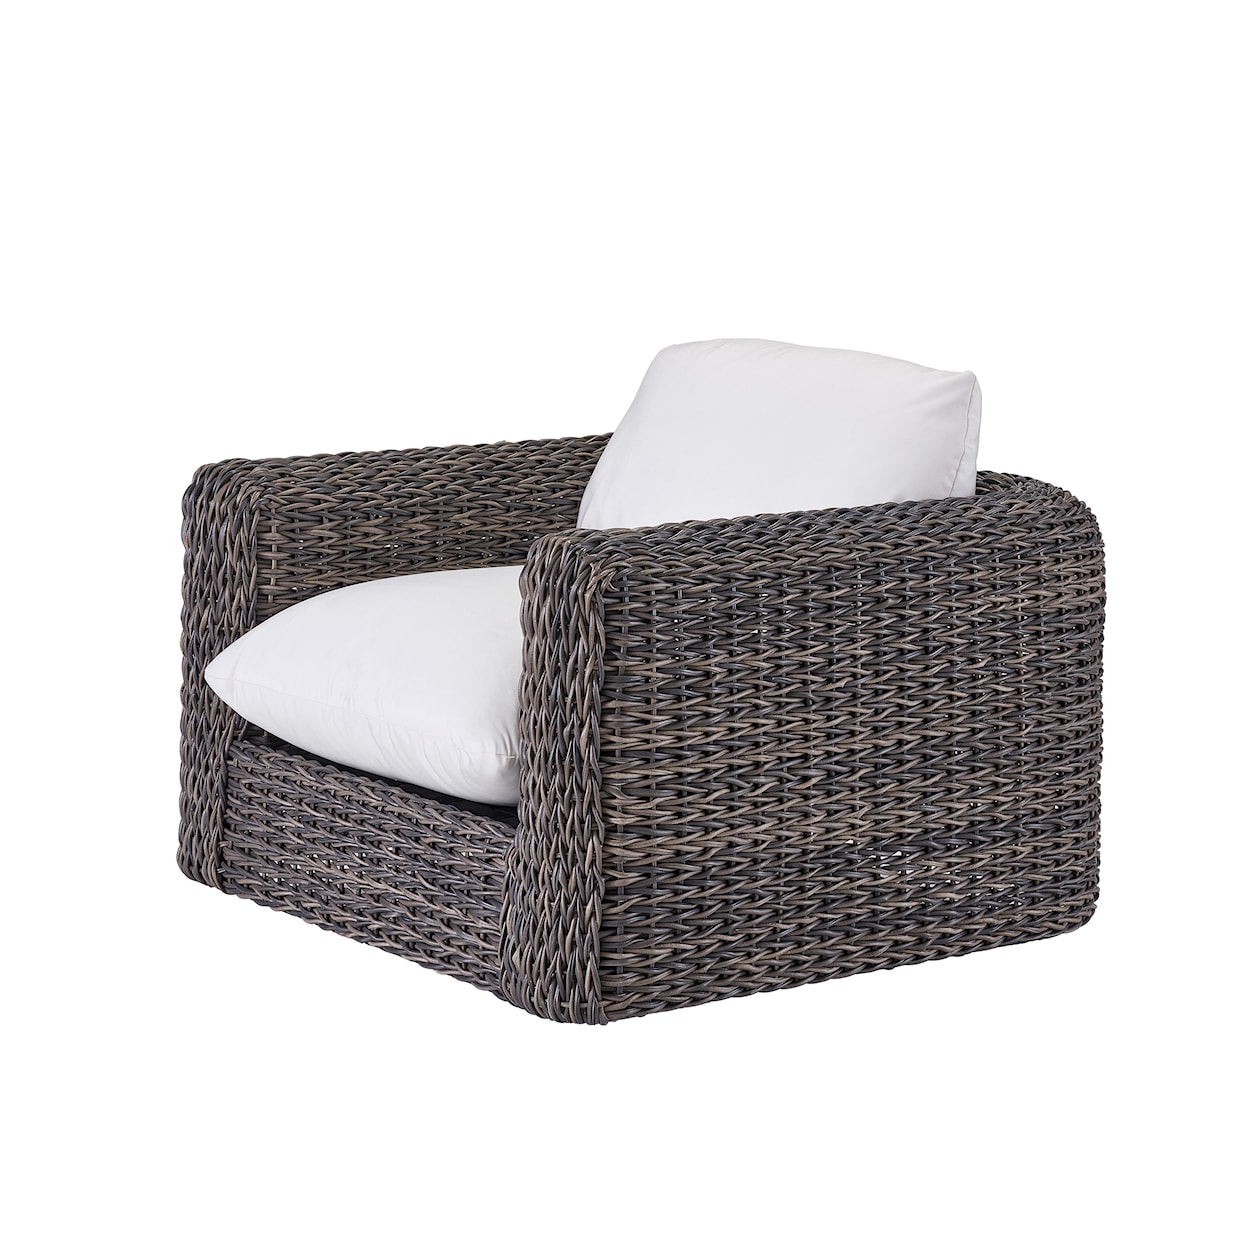 Universal Coastal Living Outdoor Outdoor Living Swivel Lounge Chair